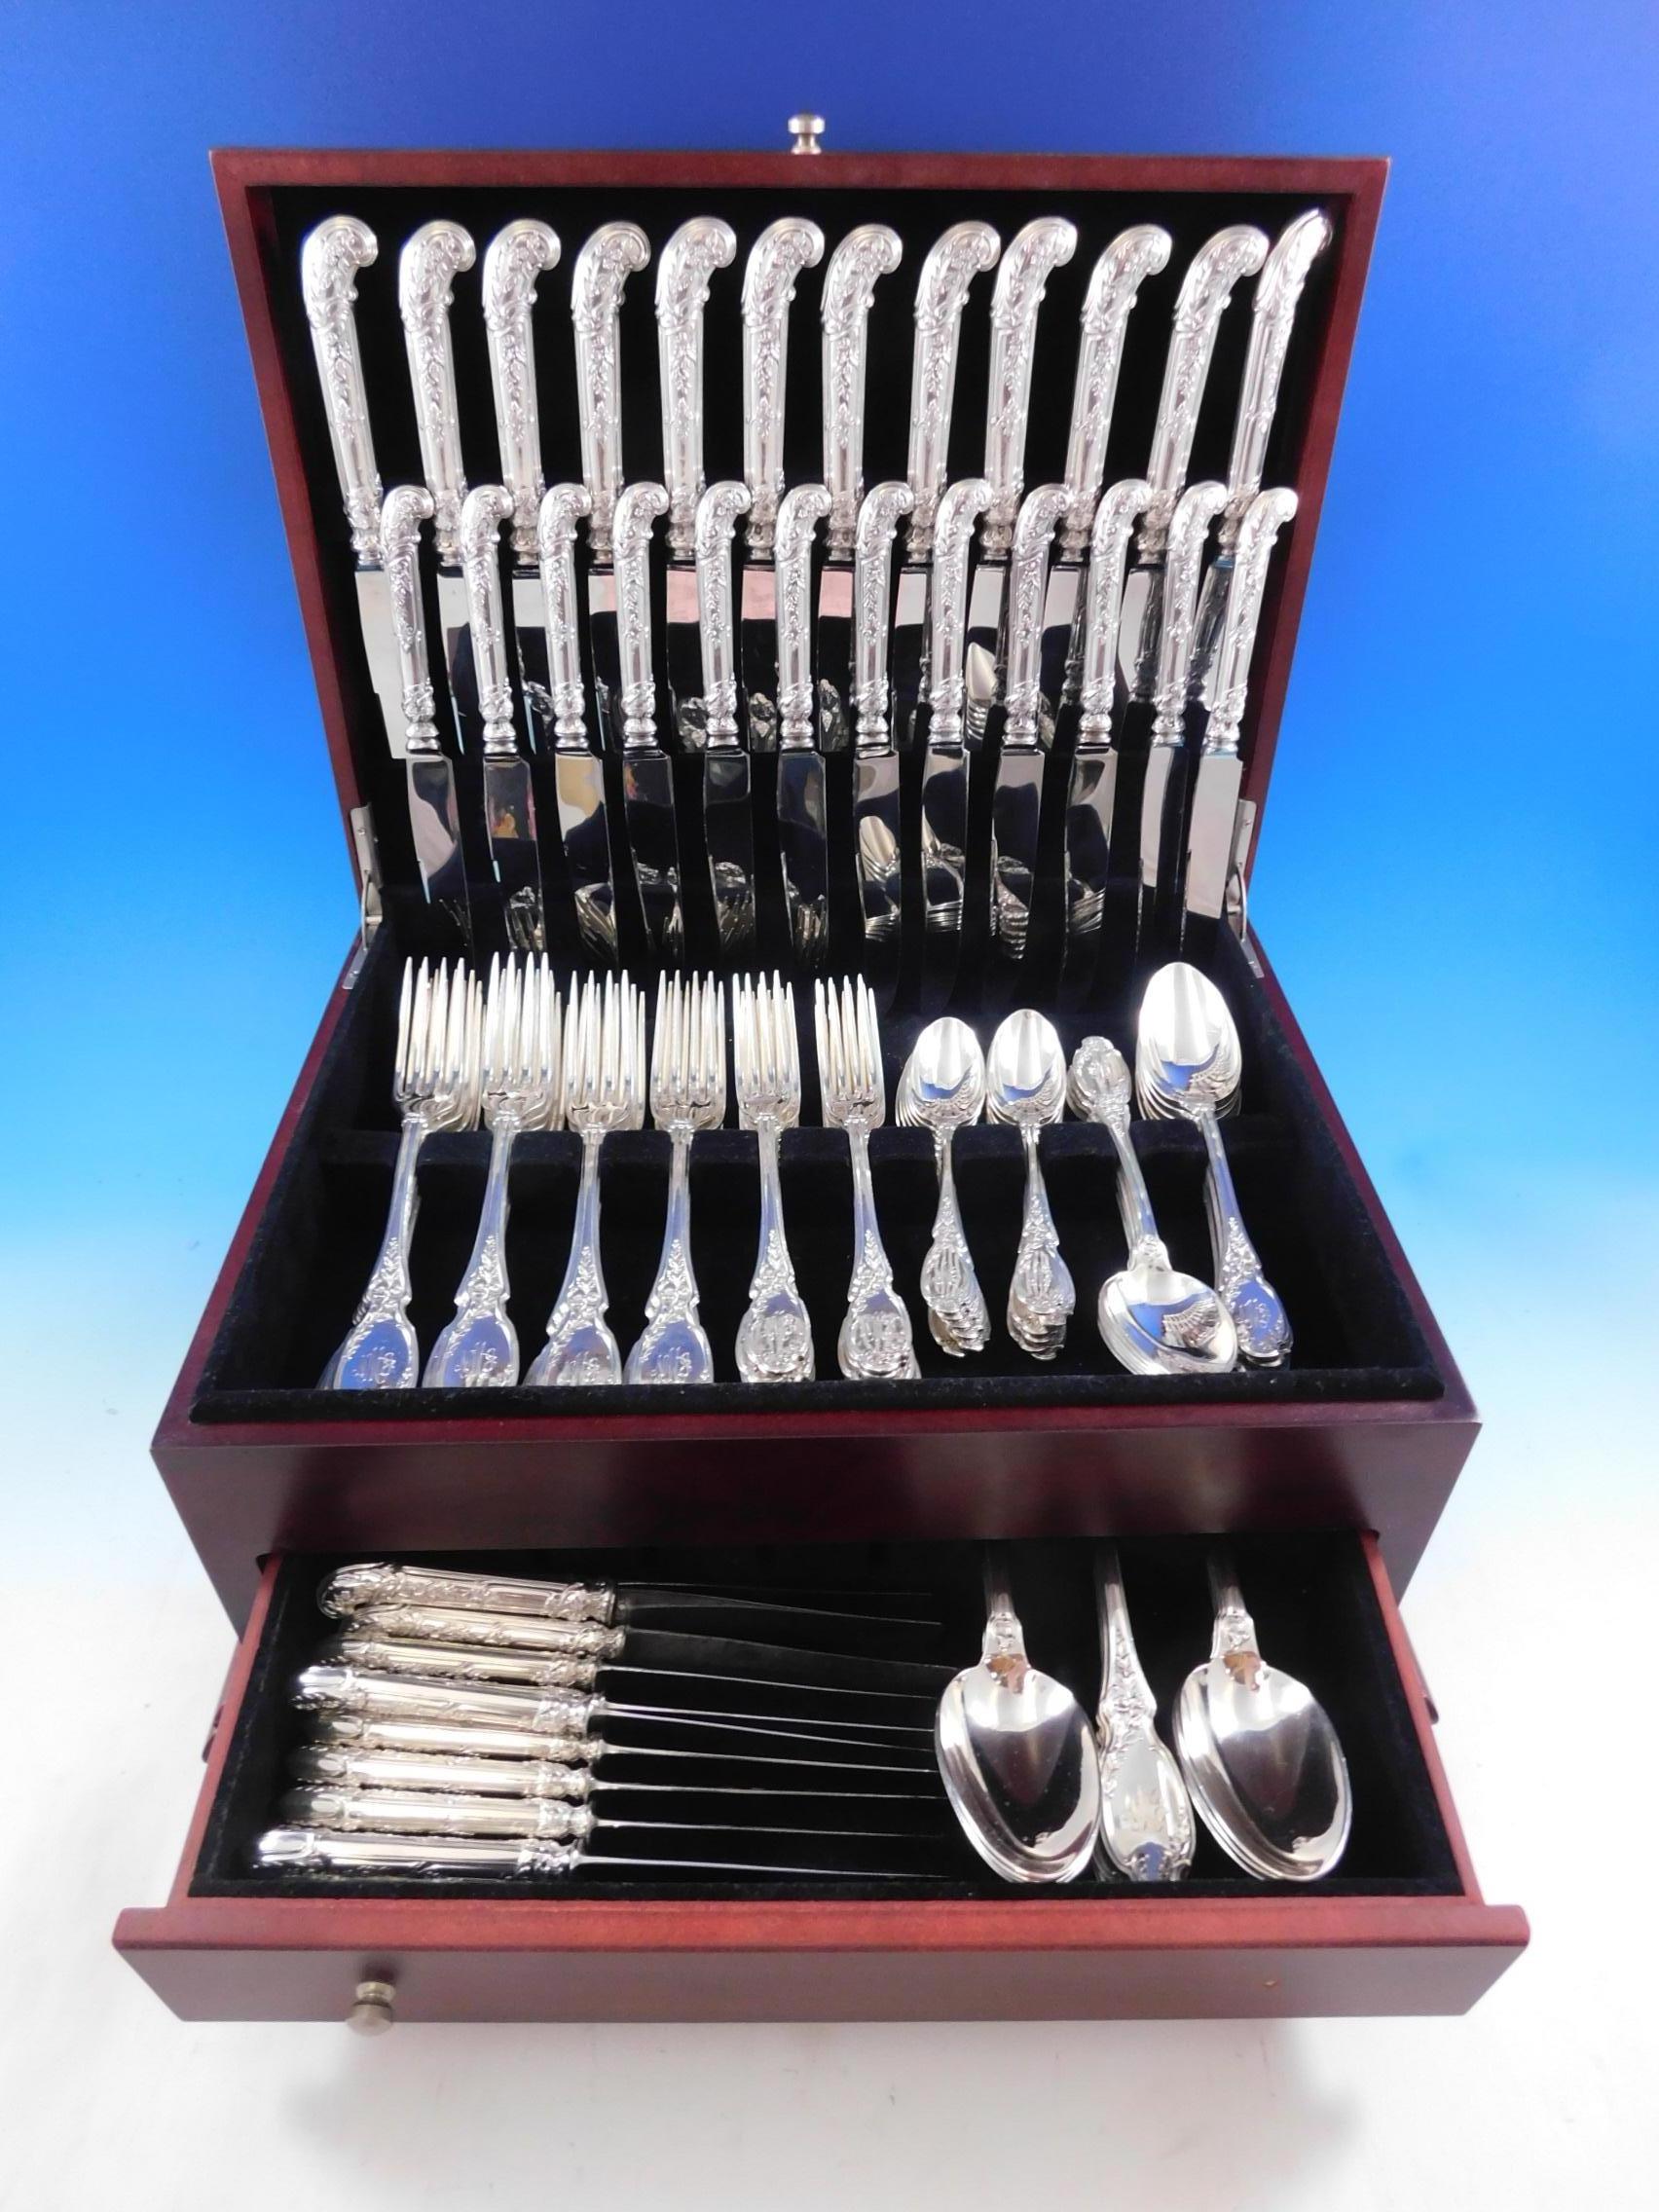 Outstanding Nouveau by Leroy & Cie / Piault, circa 1886-1897, French silver Flatware set - 102 pieces. This Art Nouveau pattern features a shaped terminal with cascading floral scroll work and wonderful pistol grip handles on the knives. This set